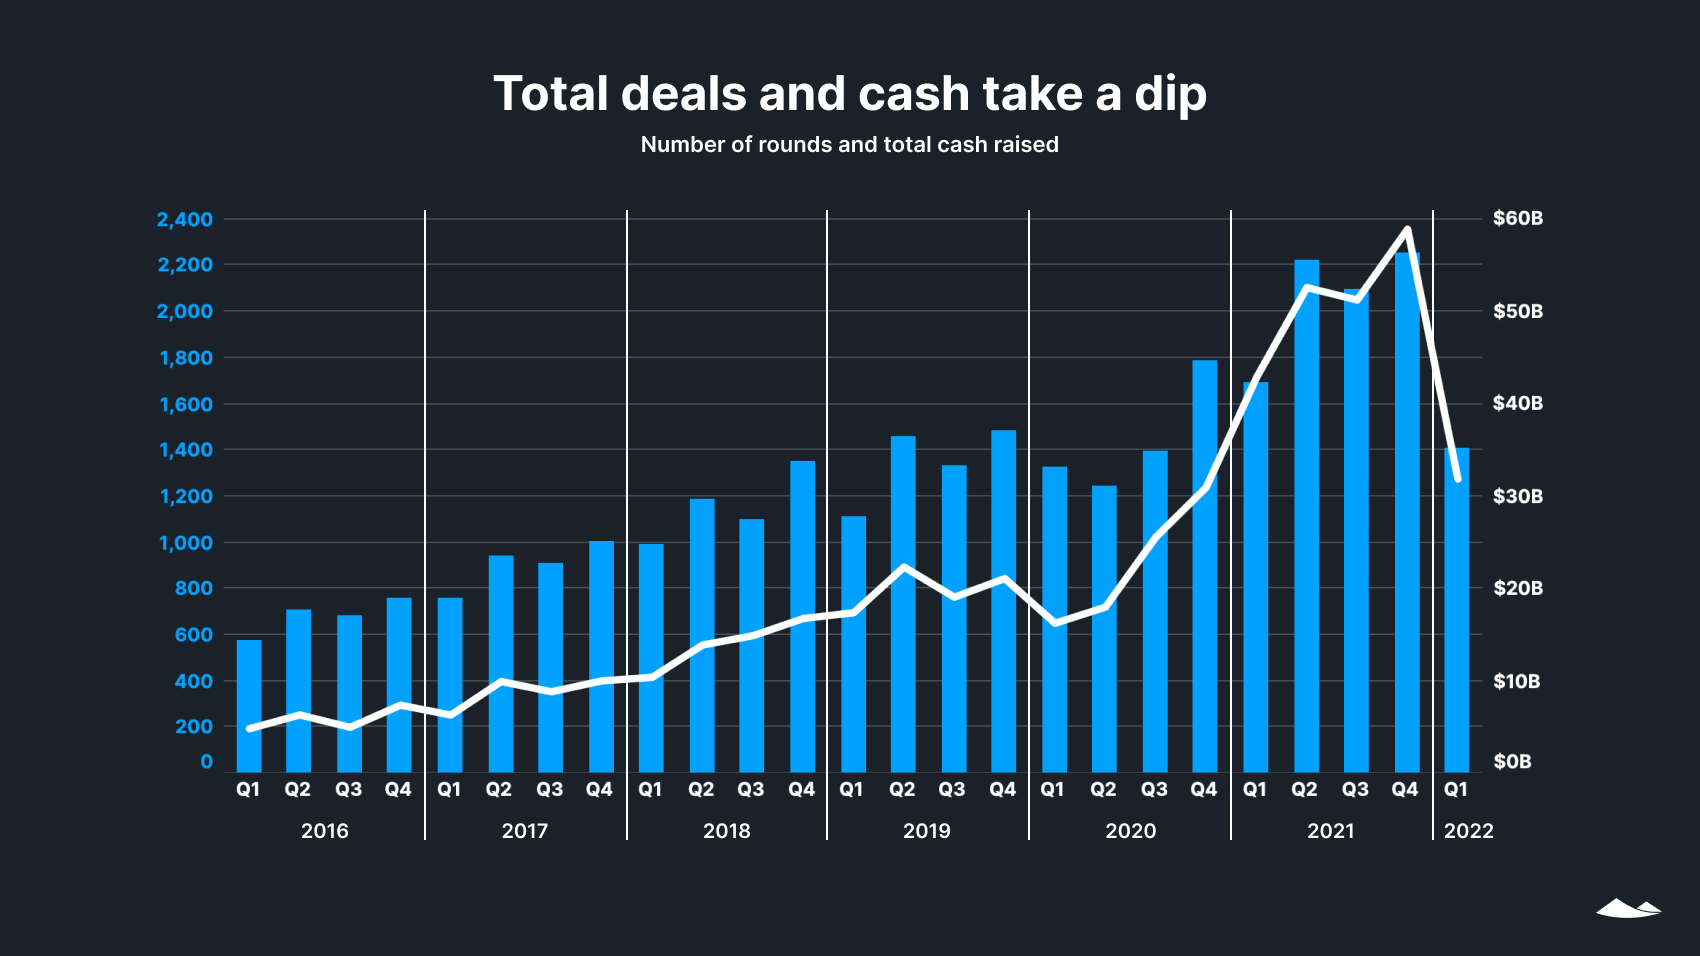 Total deals and cash take a dip